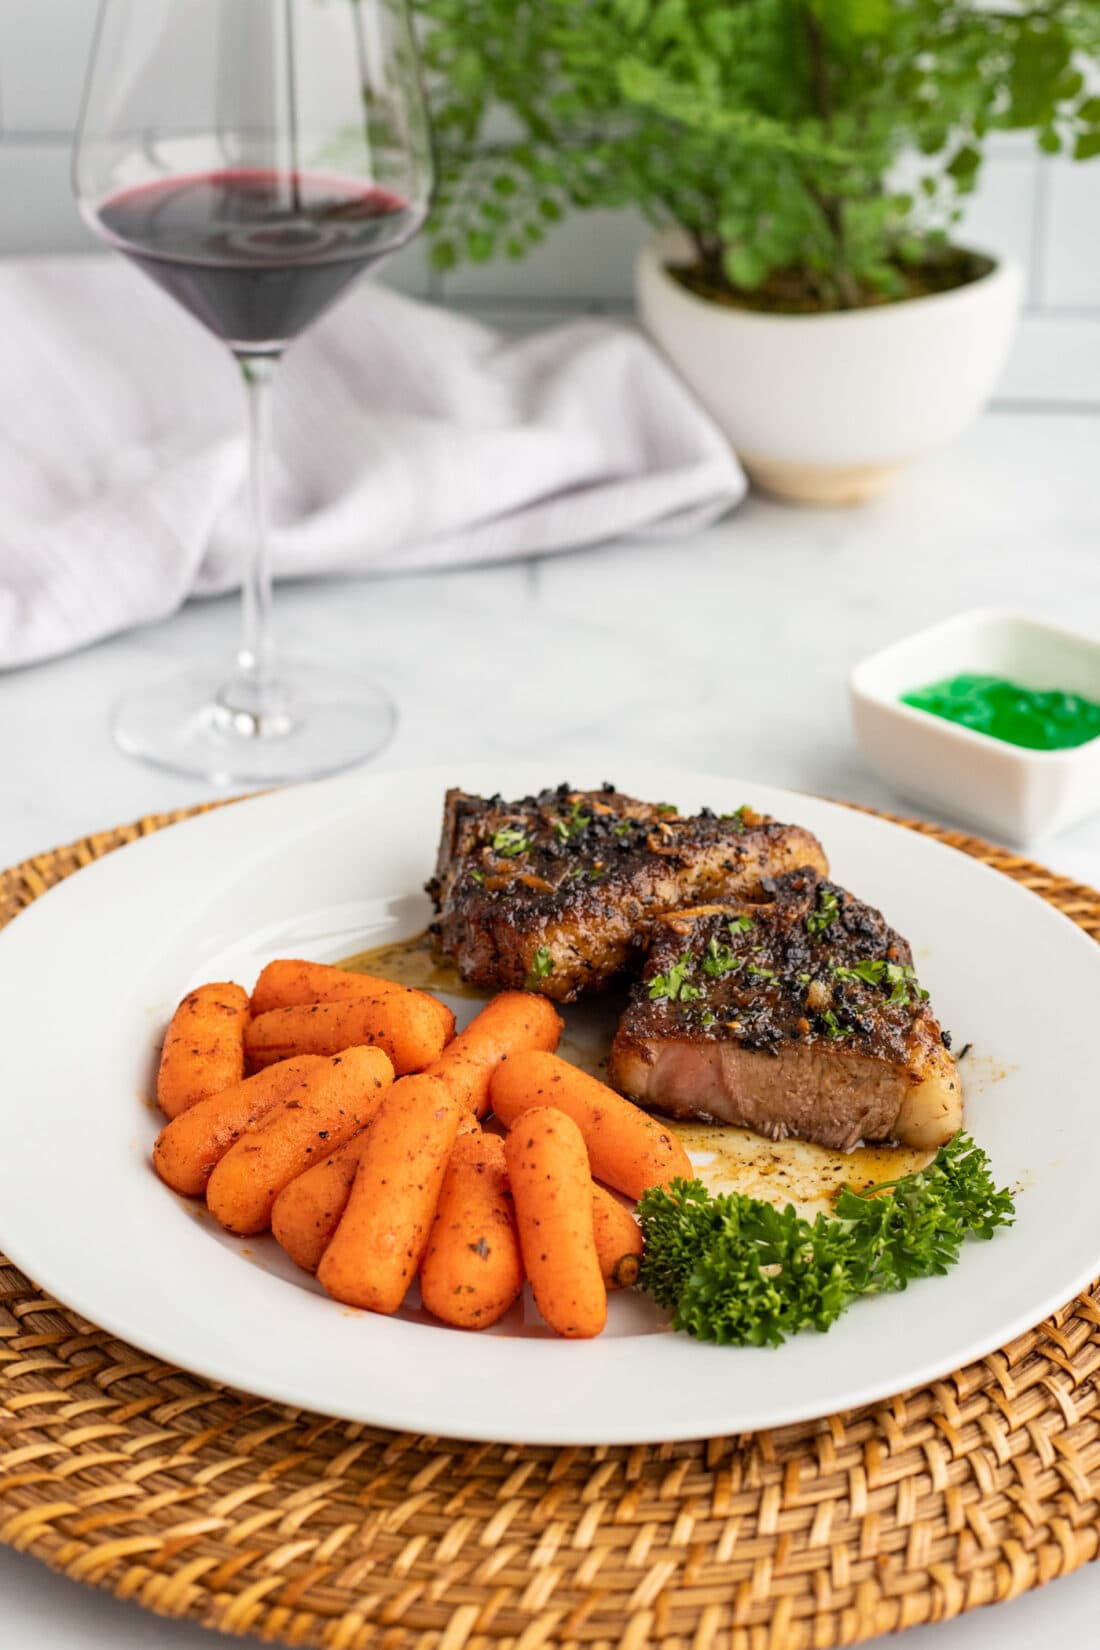 Lamb Chops and carrots on plate